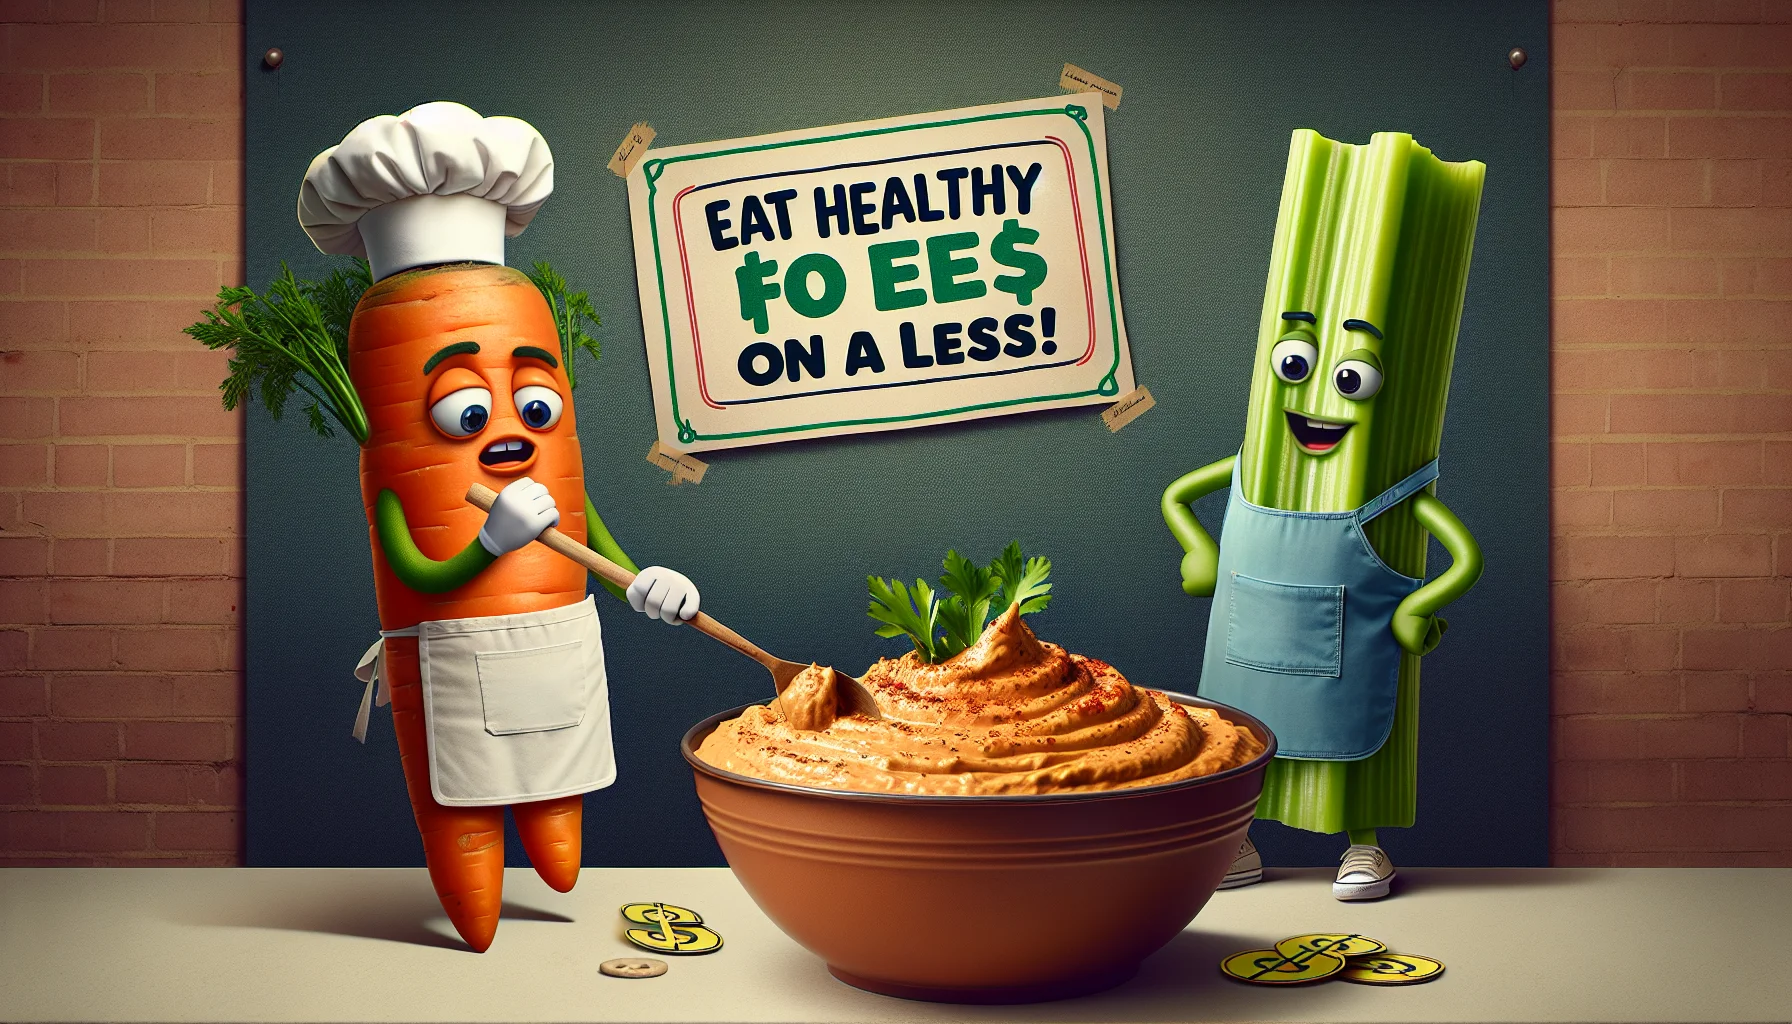 Design a humorous and realistic scenario enticing individuals to embrace healthy eating on a budget. Picture this: a carrot and a celery stick, both personified and wearing aprons, are standing on either side of a large bowl of spicy hummus. The carrot, with a chef's hat and a bemused expression, is stirring the hummus while the celery stick looks on with an approving nod. The backdrop features a banner that reads 'Eat Healthy for Less!' with dollar signs creatively integrated into the design. The overall ambience should be fun, lighthearted and inviting for individuals of any age.